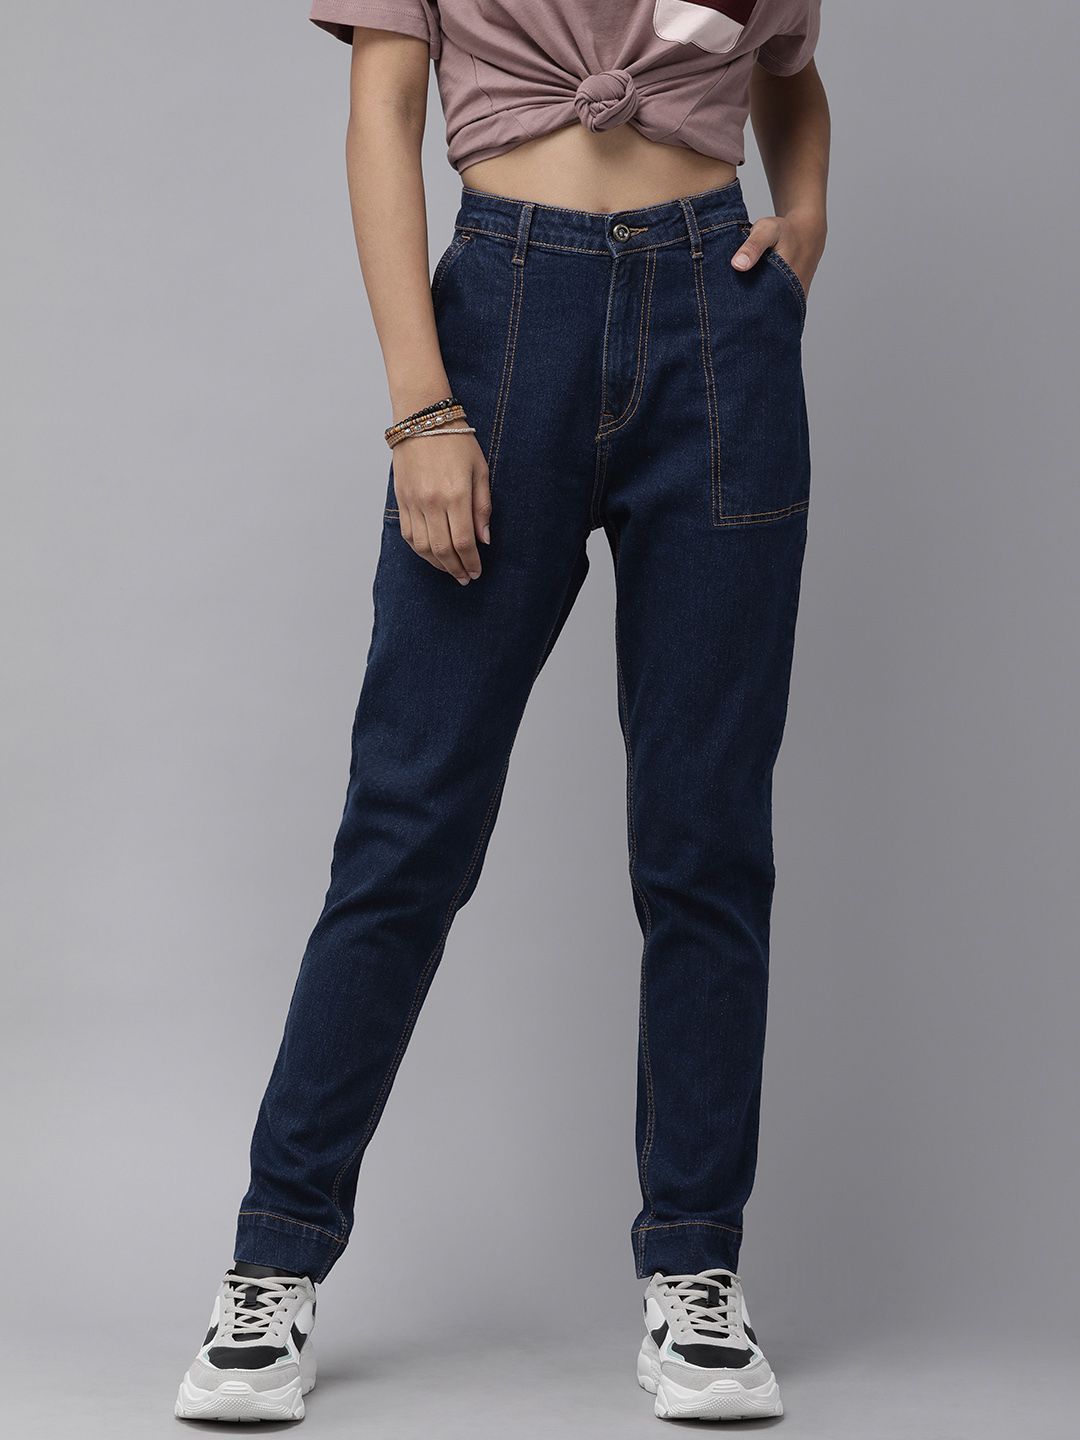 The Roadster Lifestyle Co Women Navy Blue Boyfriend Fit High-Rise Jeans Price in India